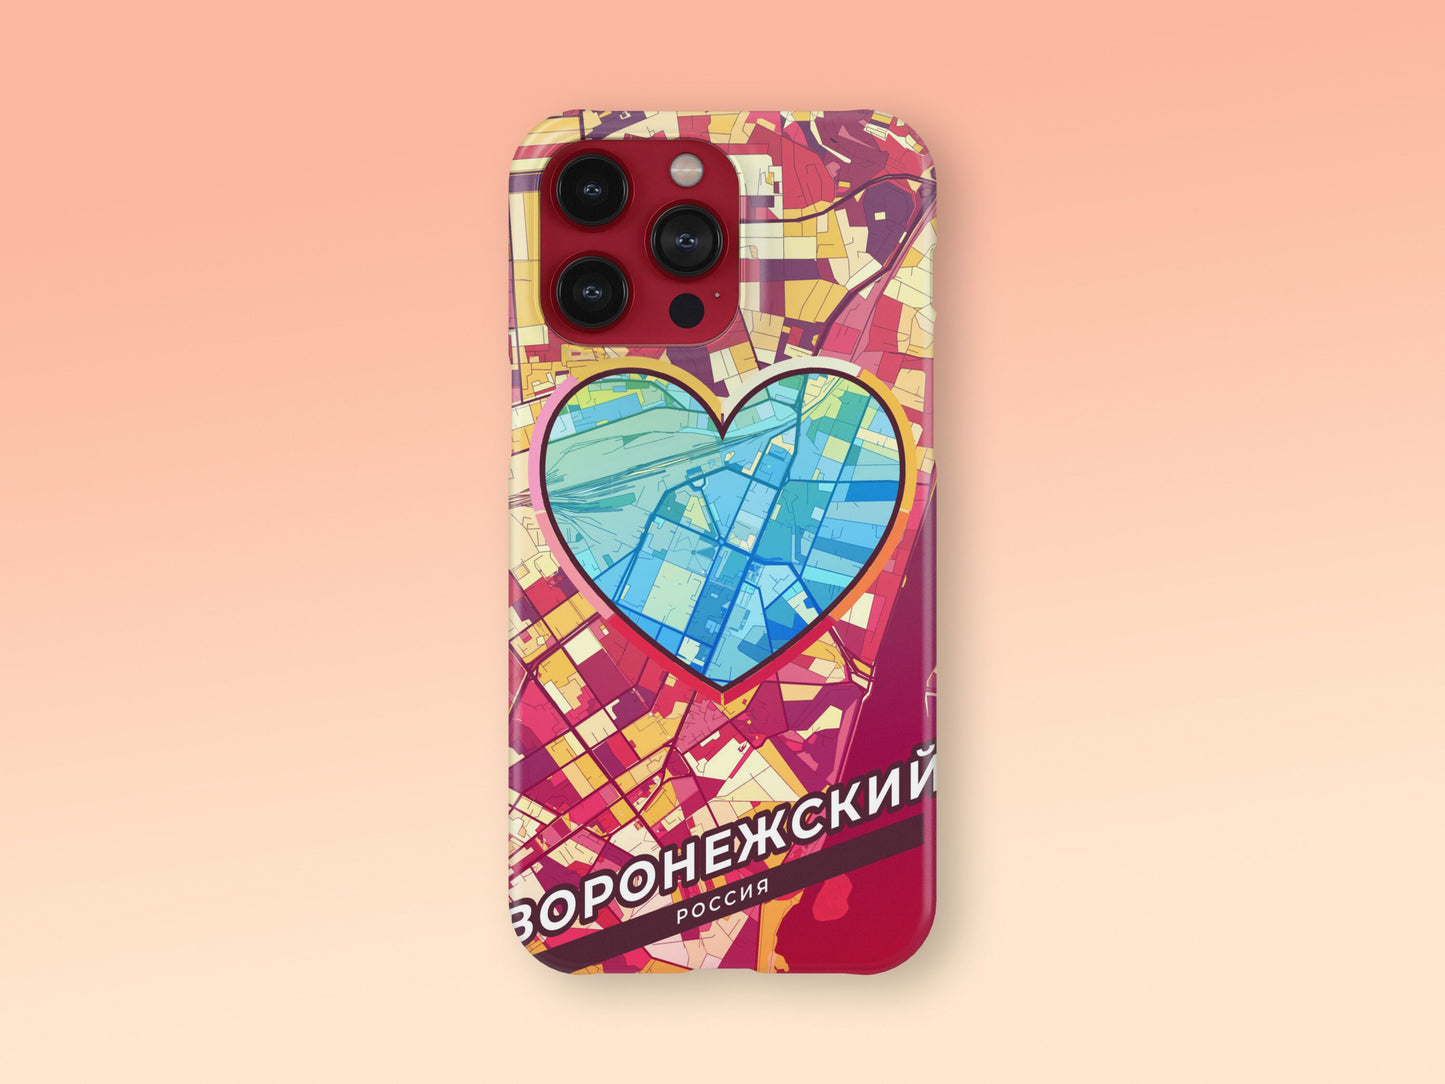 Voronezh Russia slim phone case with colorful icon 2